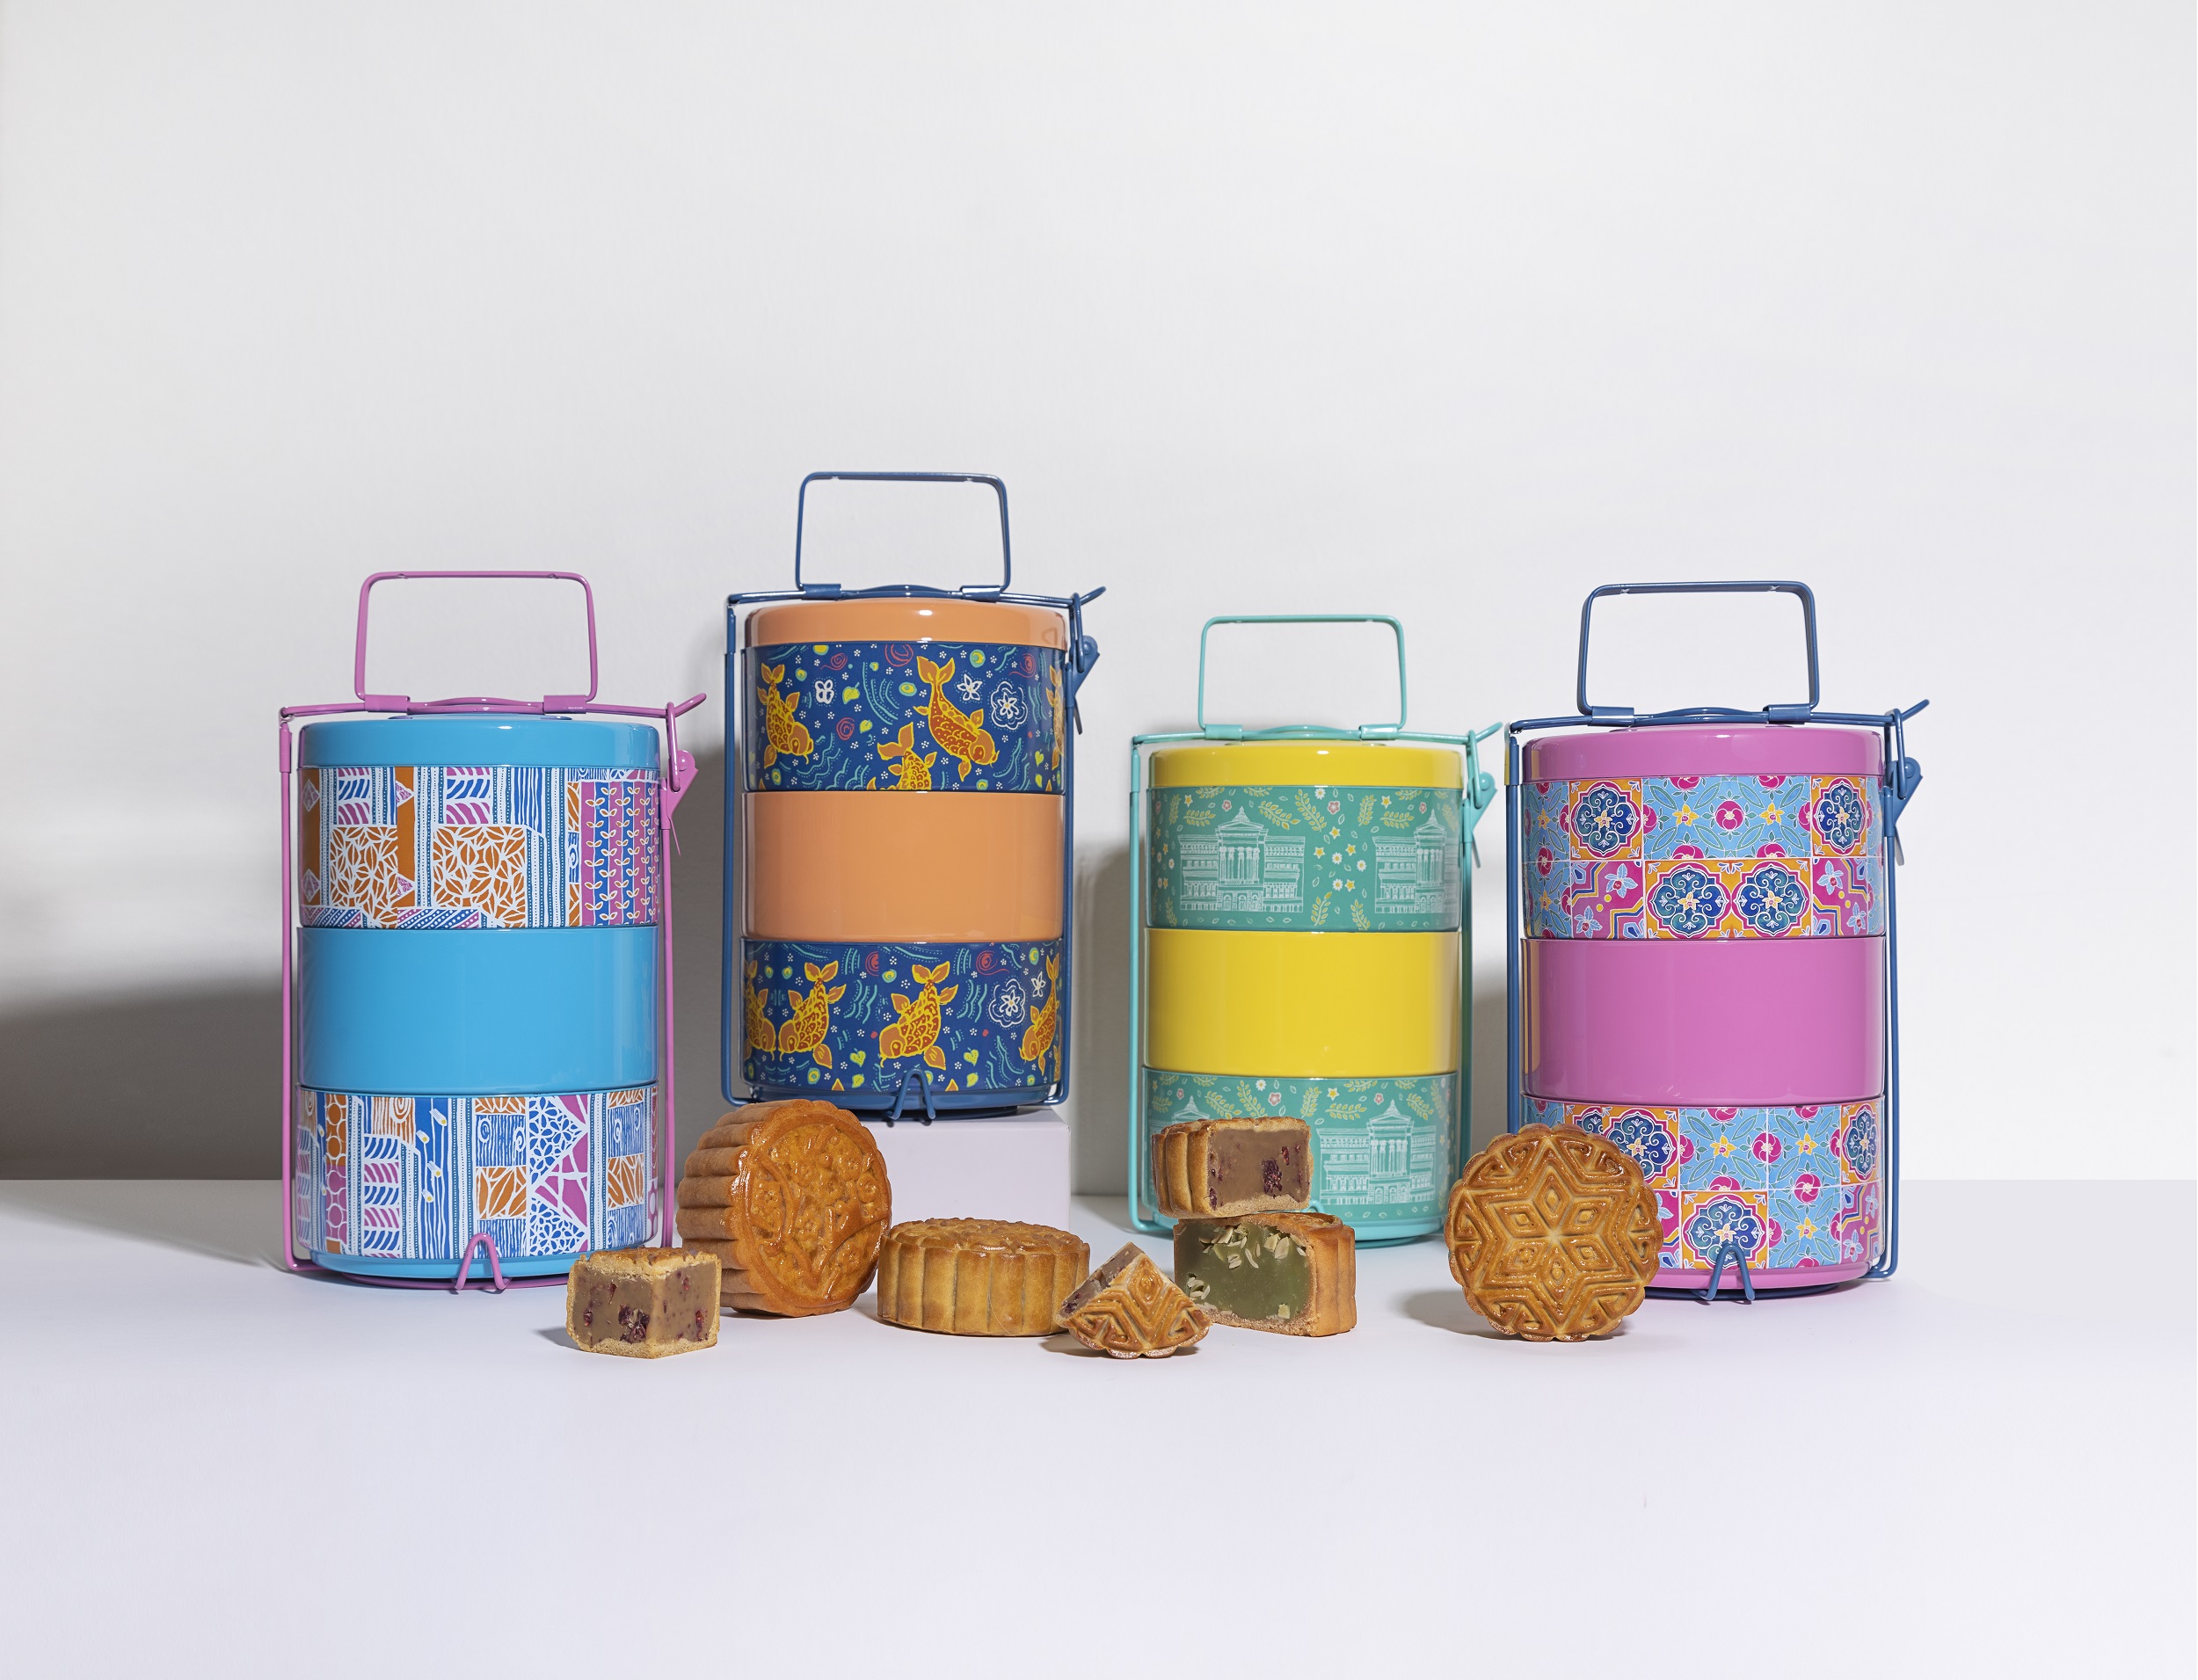 The 3-tier tiffin carrier gift sets are available in four different designs